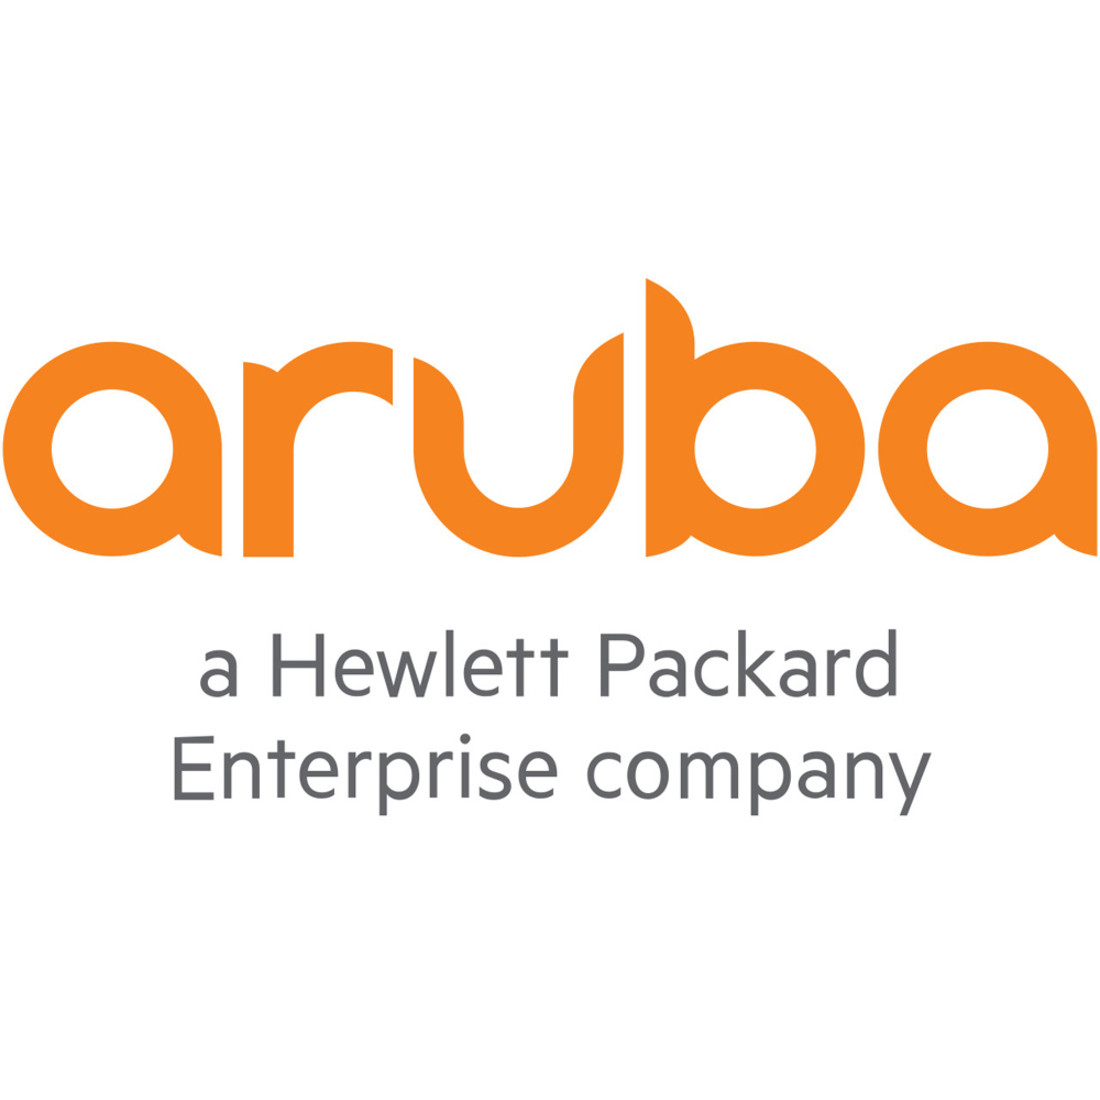 Aruba Central FoundationSubscription LicenseElectronic Q9Y79AAE